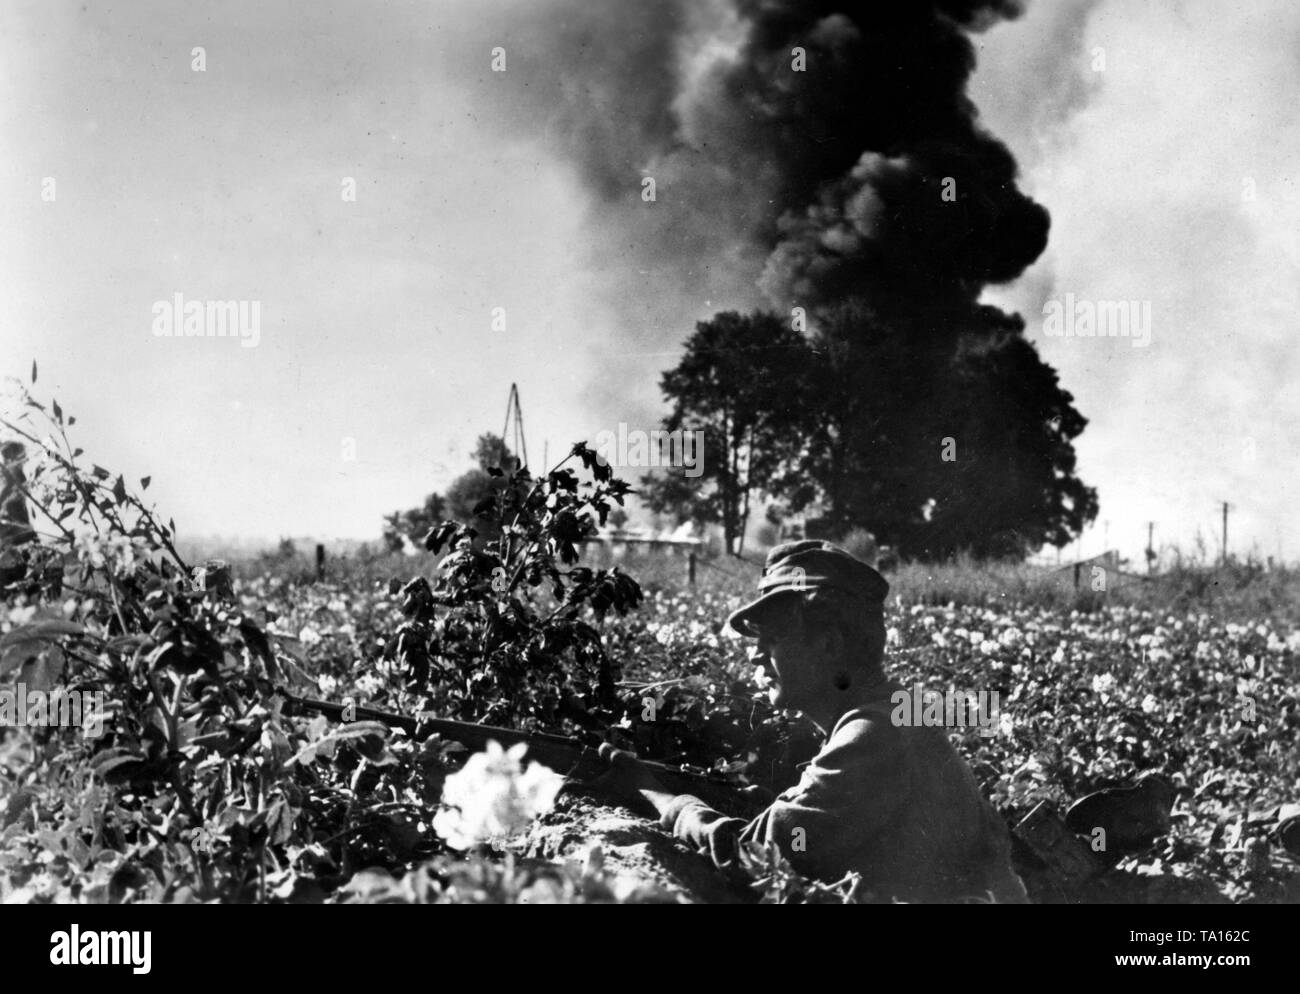 A German soldier seeks cover from the Soviet artillery fire in a field. In the background, smoke rises from the hitting grenades. The Operation Bagration leads to the collapse of Army Group Center. Stock Photo